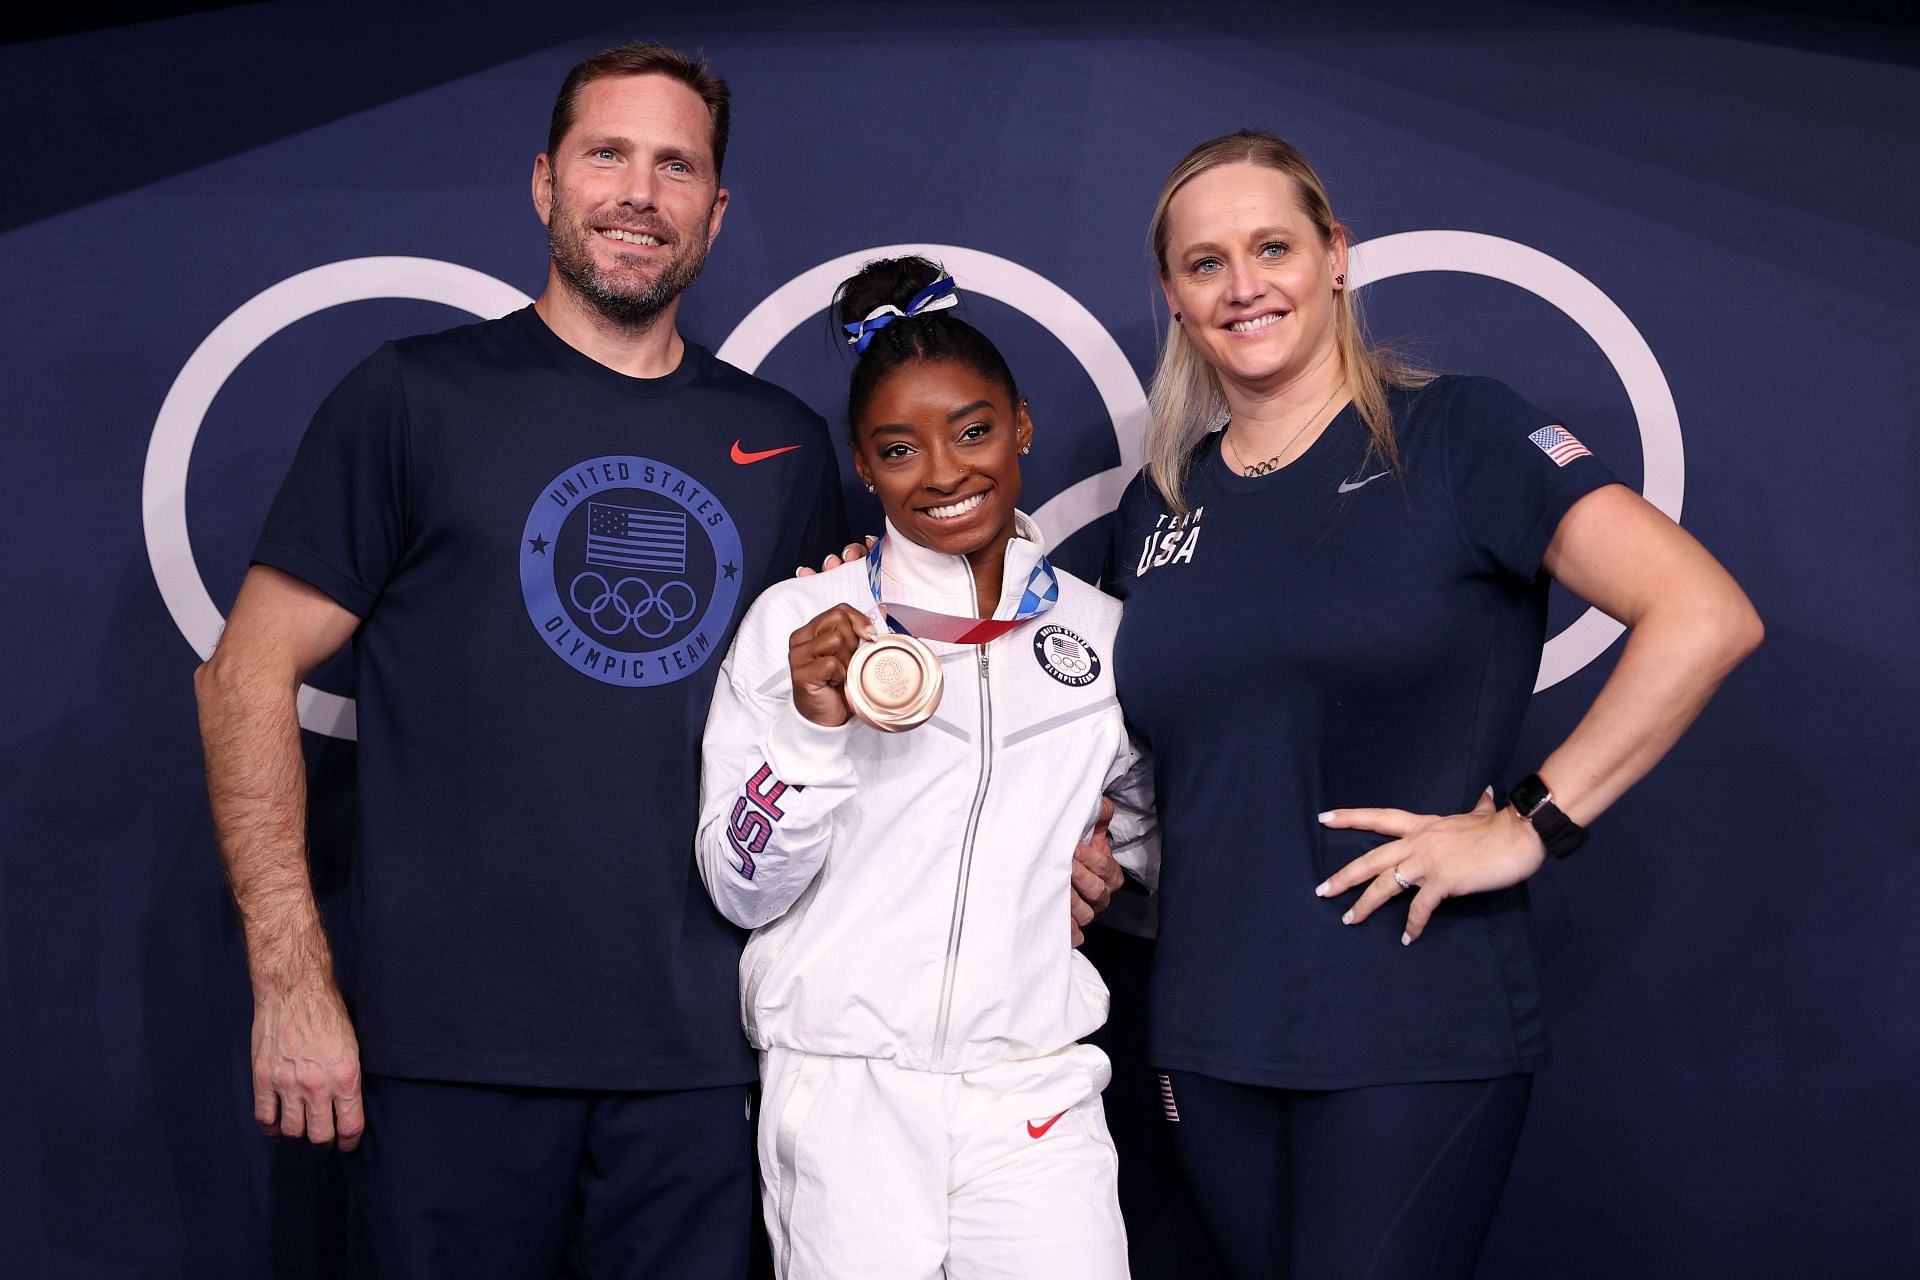 Simone Biles poses with the bronze medal alongside coaches Laurent Landi and Cecile Canqueteau-Landi following the Women&#039;s Balance Beam Final at the 2020 Tokyo Olympic Games in Tokyo, Japan.